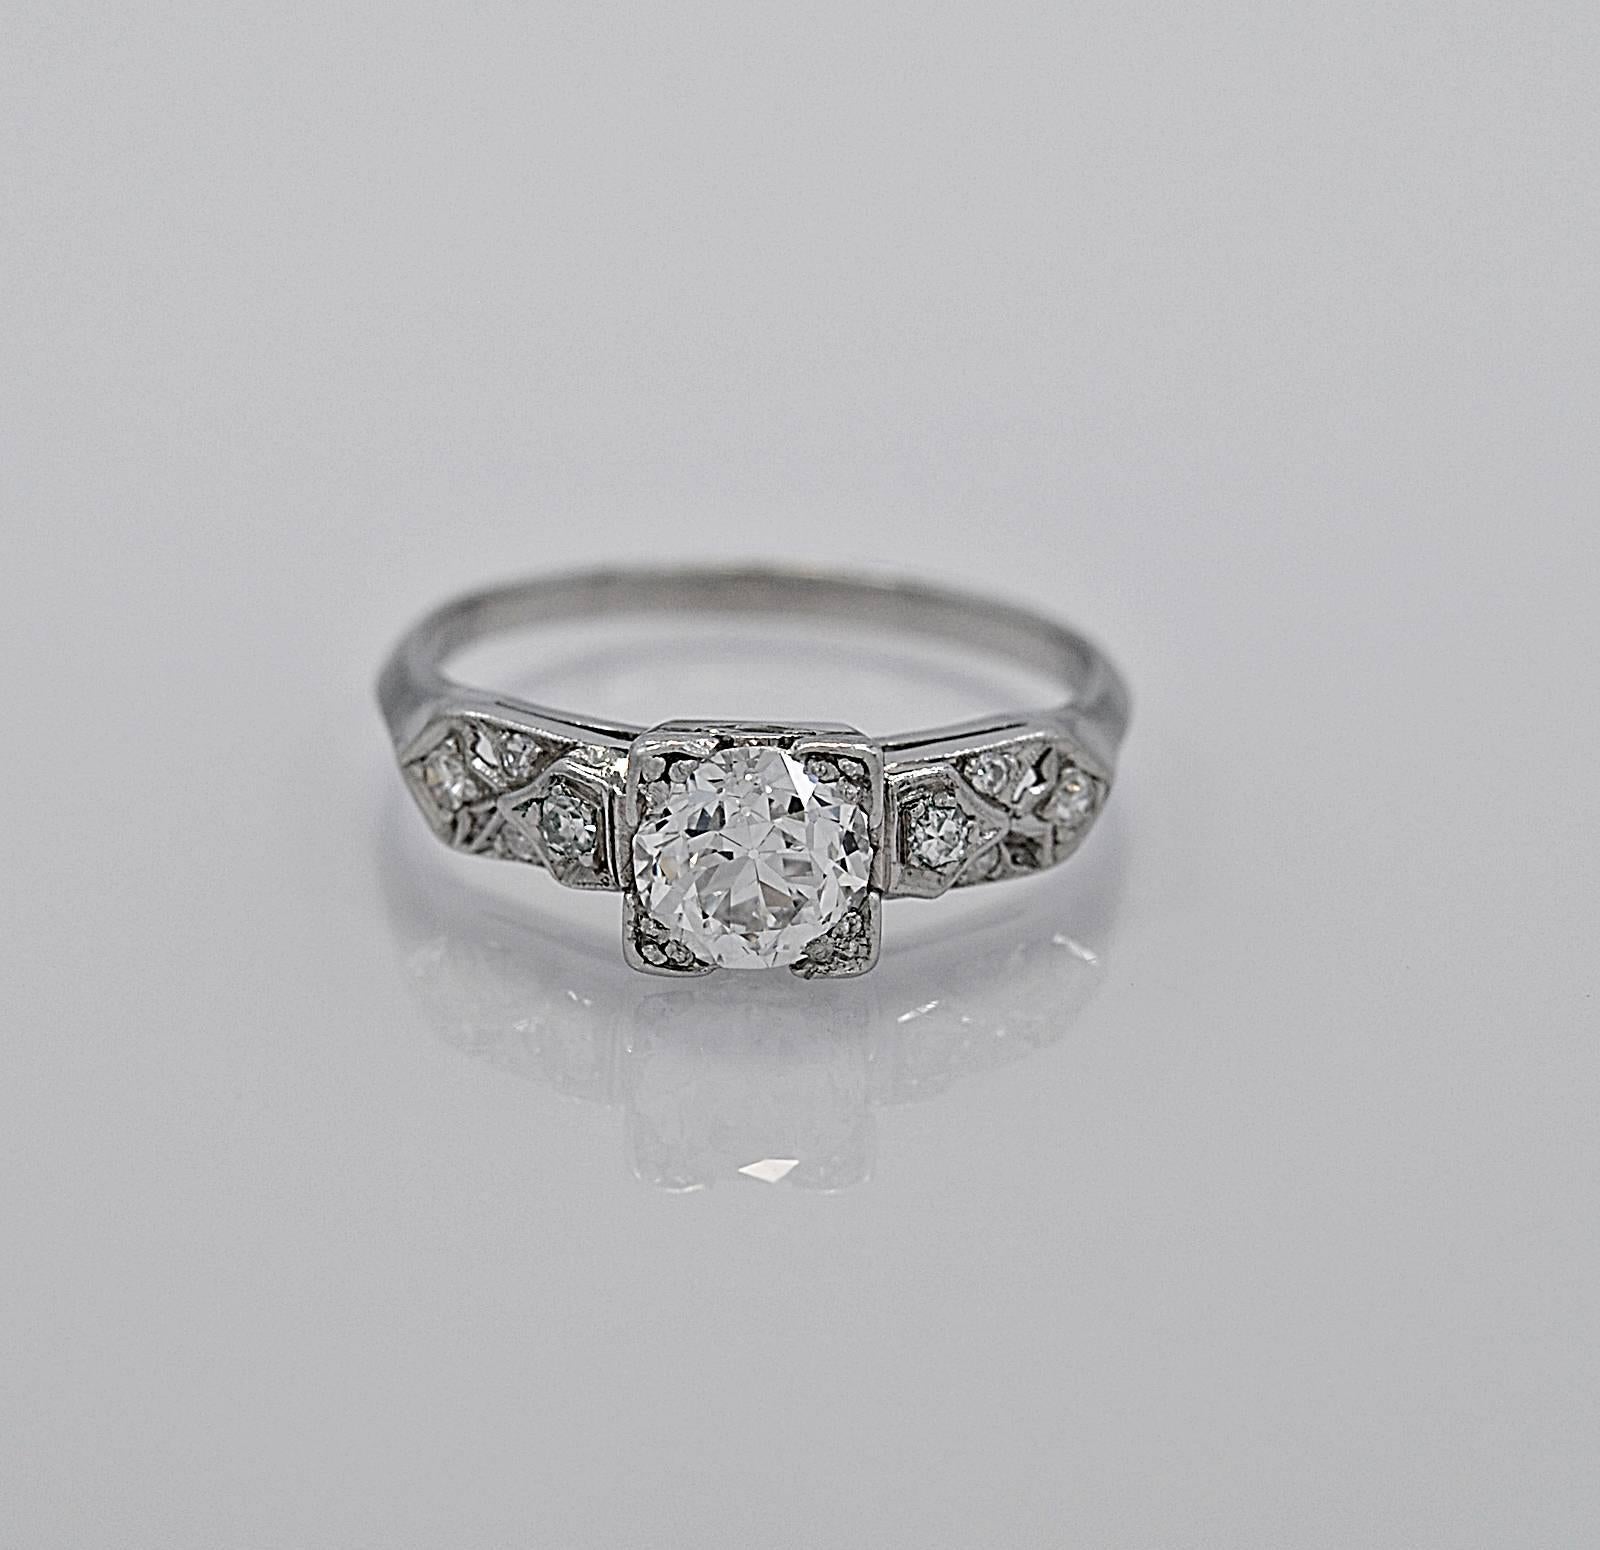 An antique engagement ring crafted in platinum and features a .94ct. apx. center diamond with SI1 clarity and G color. The side diamonds are .12ct. apx. T.W. and gently decorate the sides of the center diamond, east to west. The trefoil prongs on